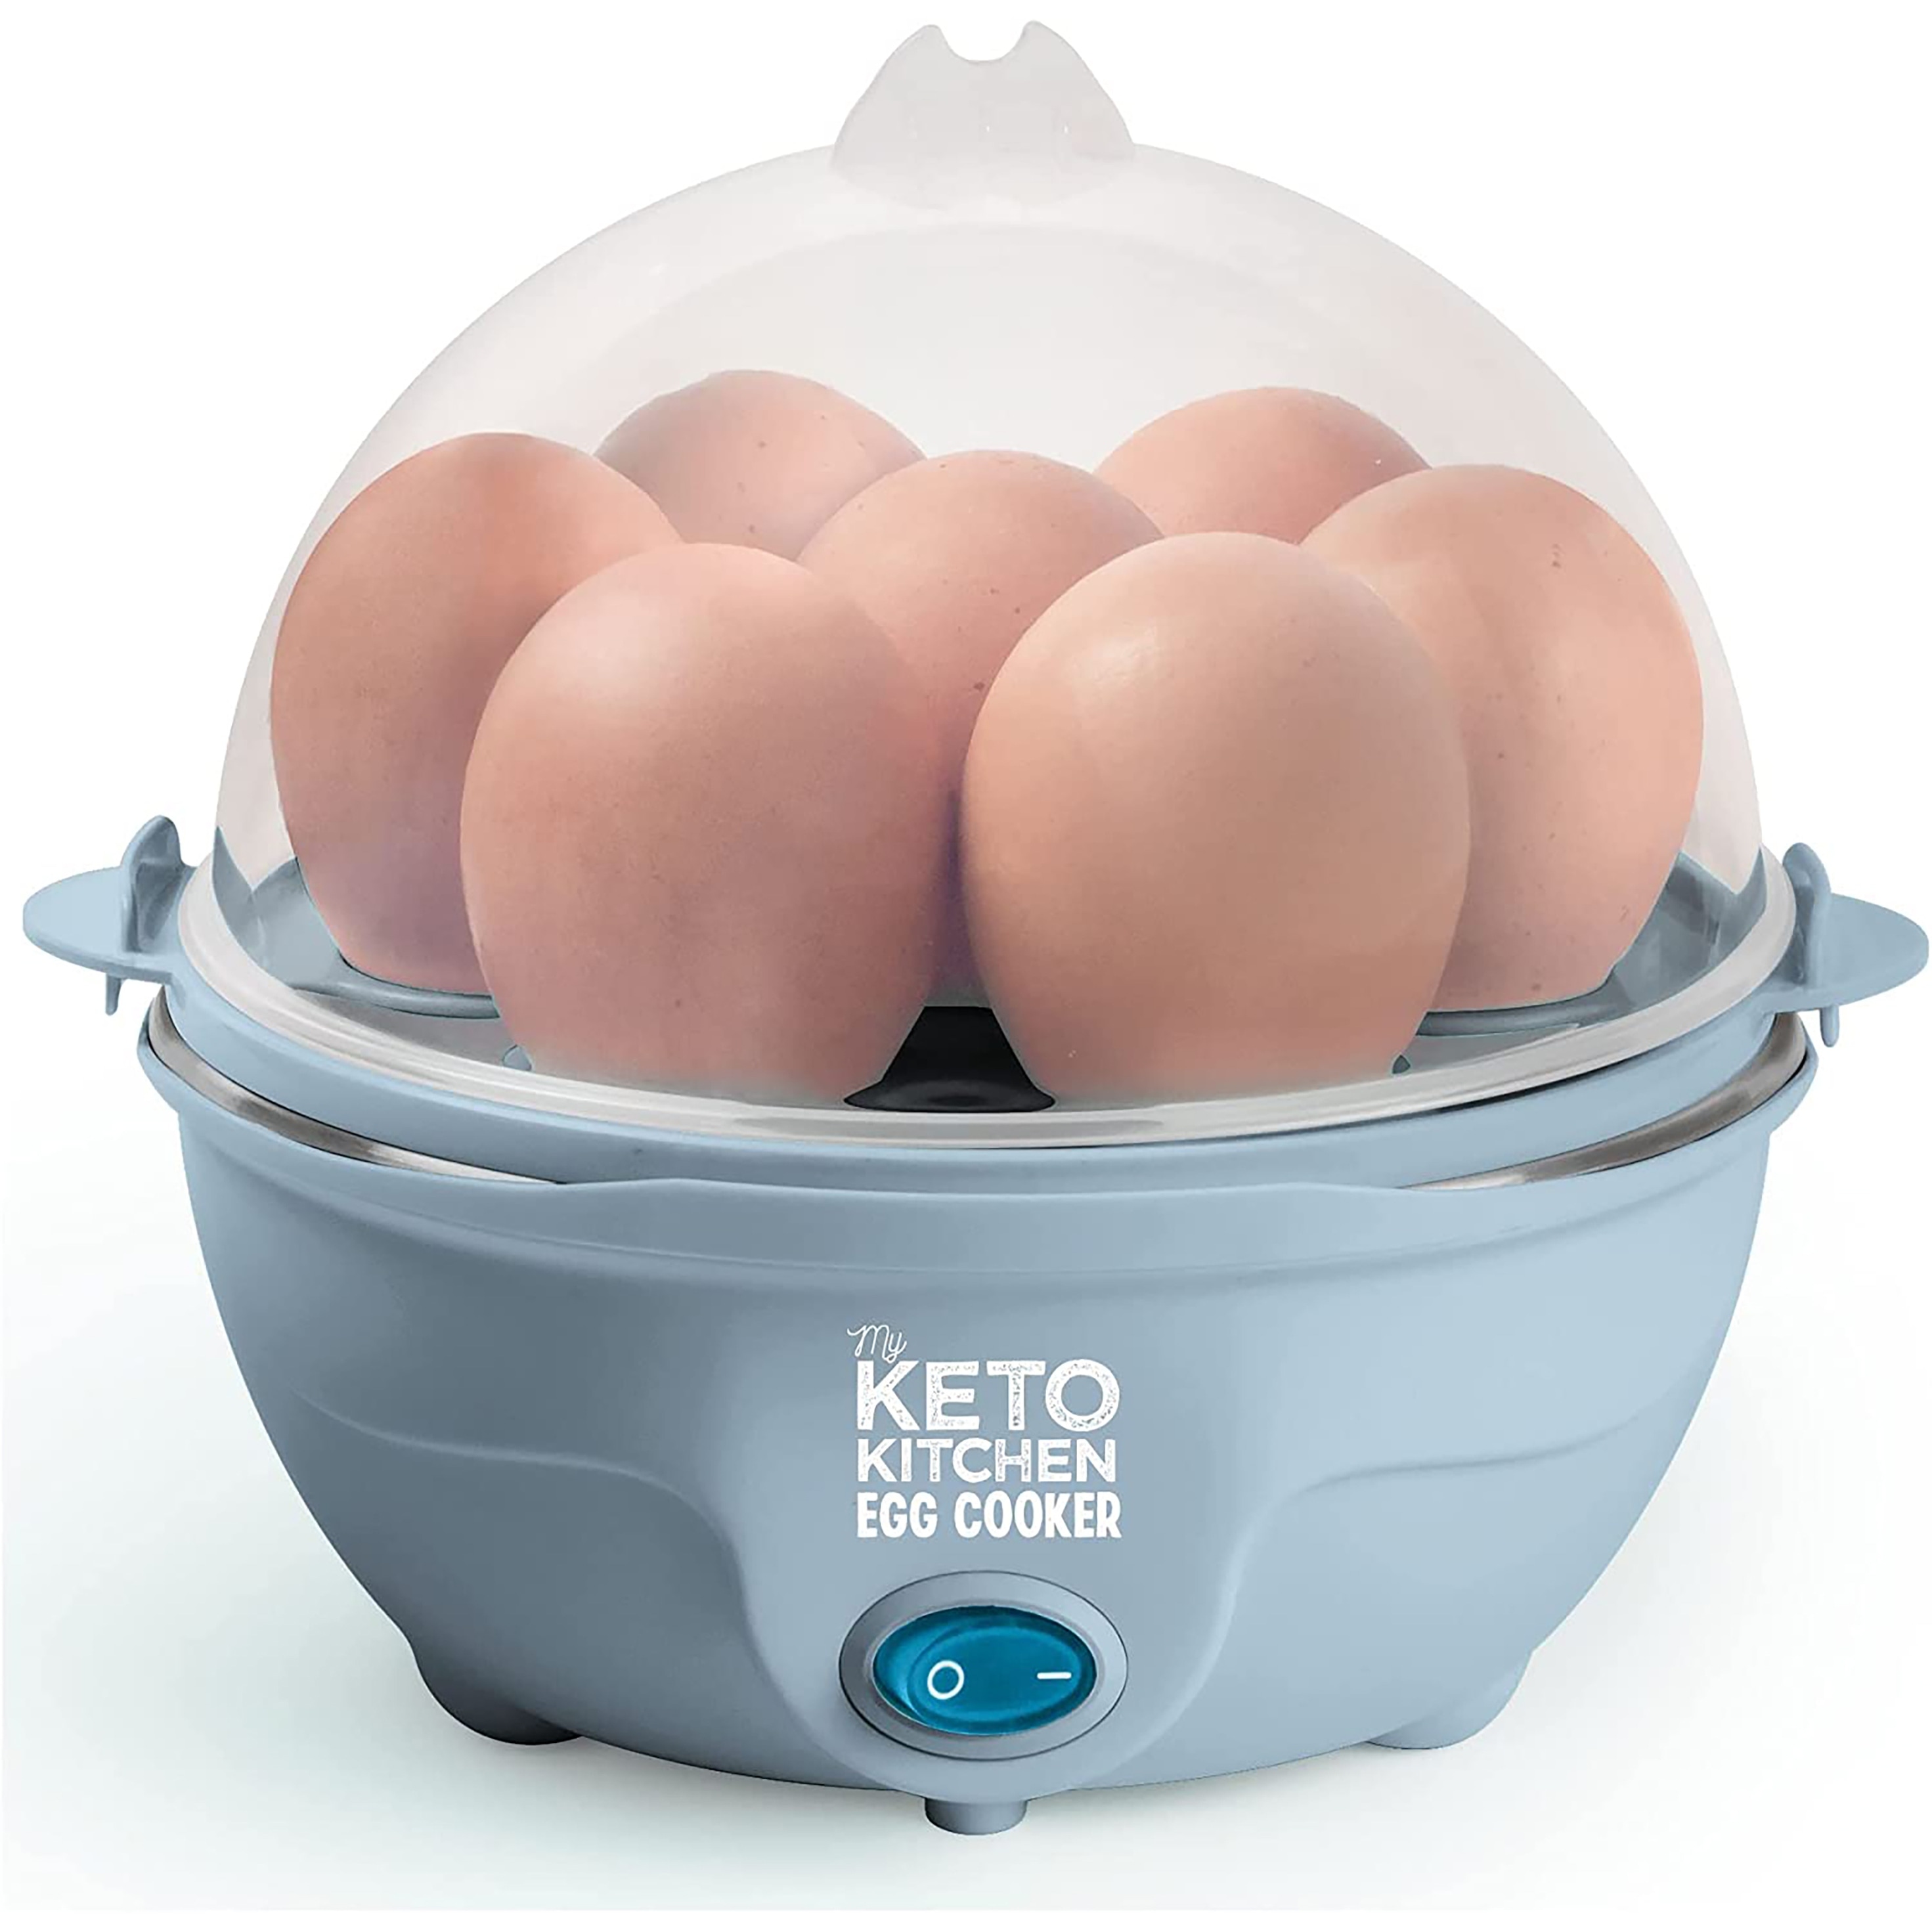 https://ak1.ostkcdn.com/images/products/is/images/direct/b260f9a3d744313ef6b448f0f8a67b6a80de1a0e/Nostalgia-My-Keto-Kitchen-7-Egg-Cooker.jpg